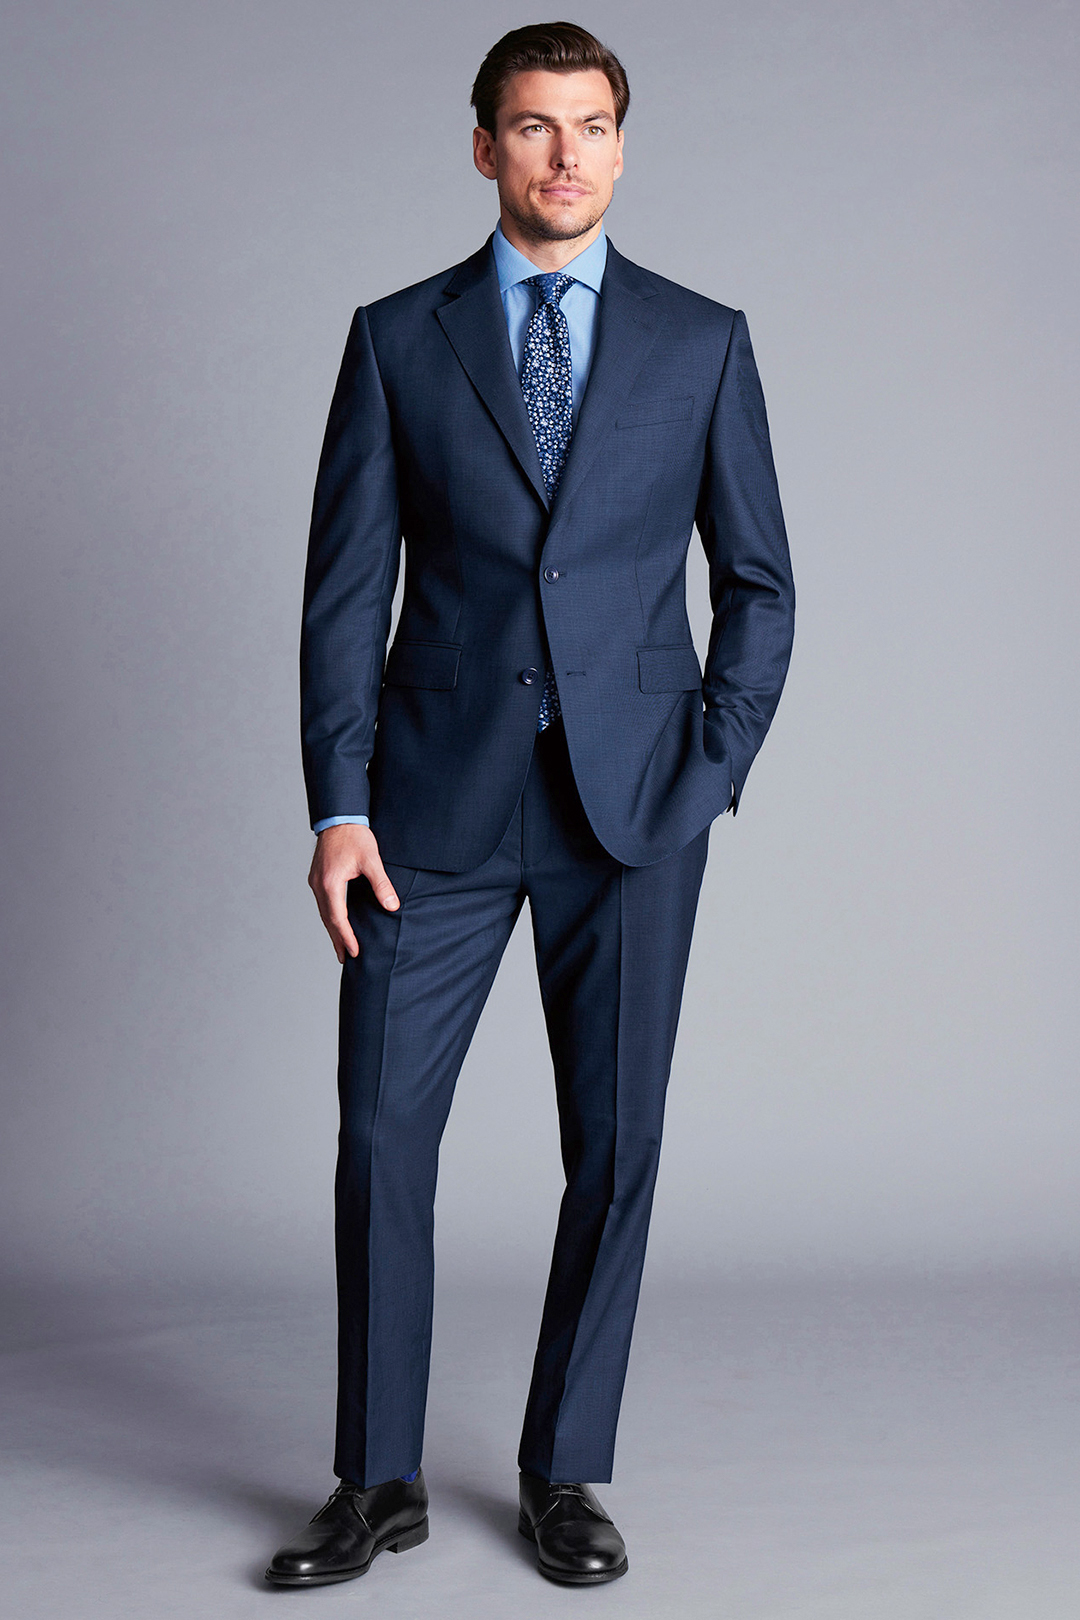 Navy suit, light blue dress shirt, blue dotted tie, and black derby shoes outfit